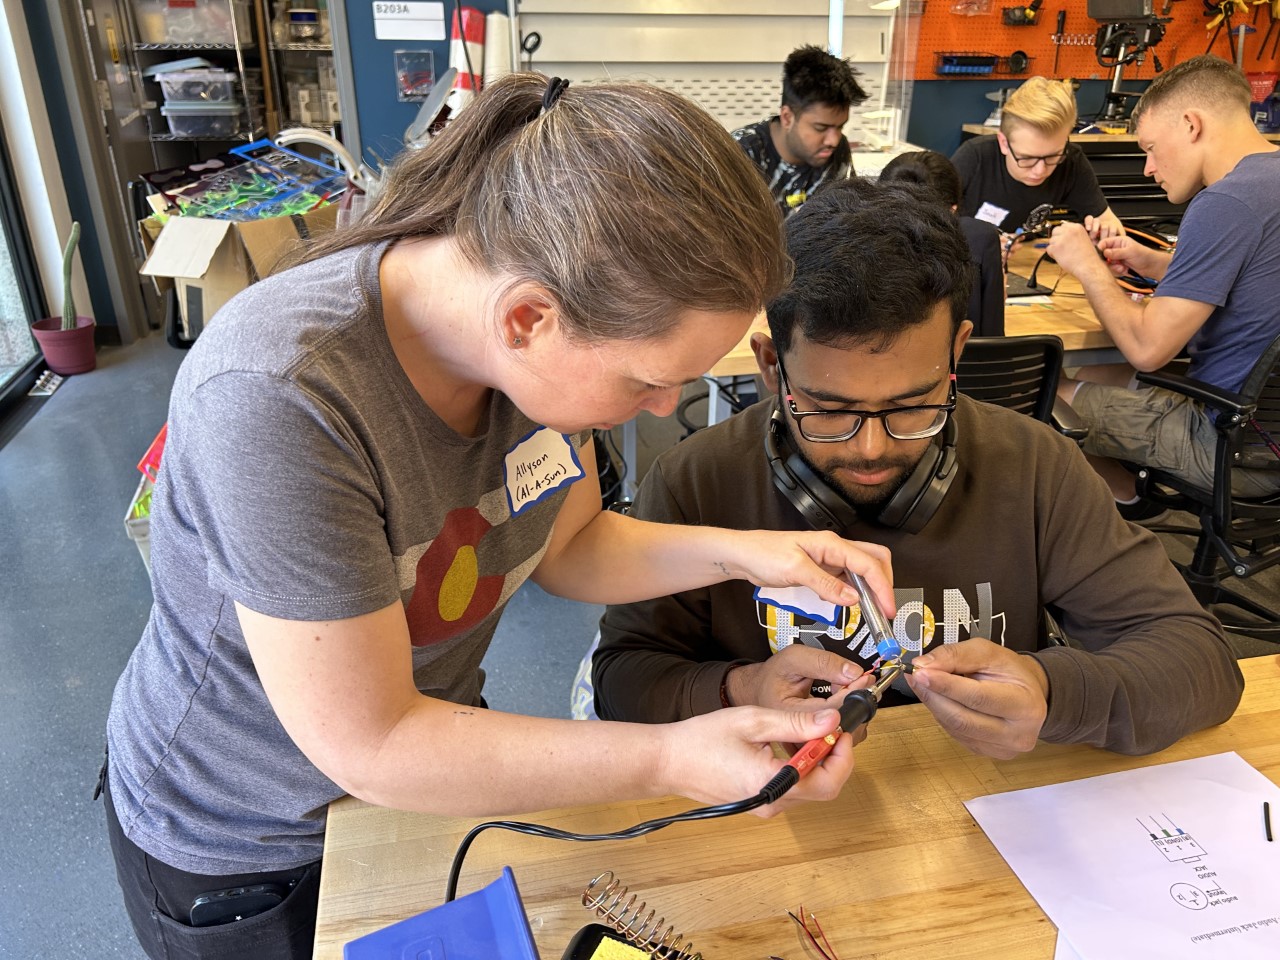 A woman in a gray Colorado flag t-shirt with a pony tail is helping a male student learn to solder. Behind them is a table of three more students soldering during a LightSound workshop.